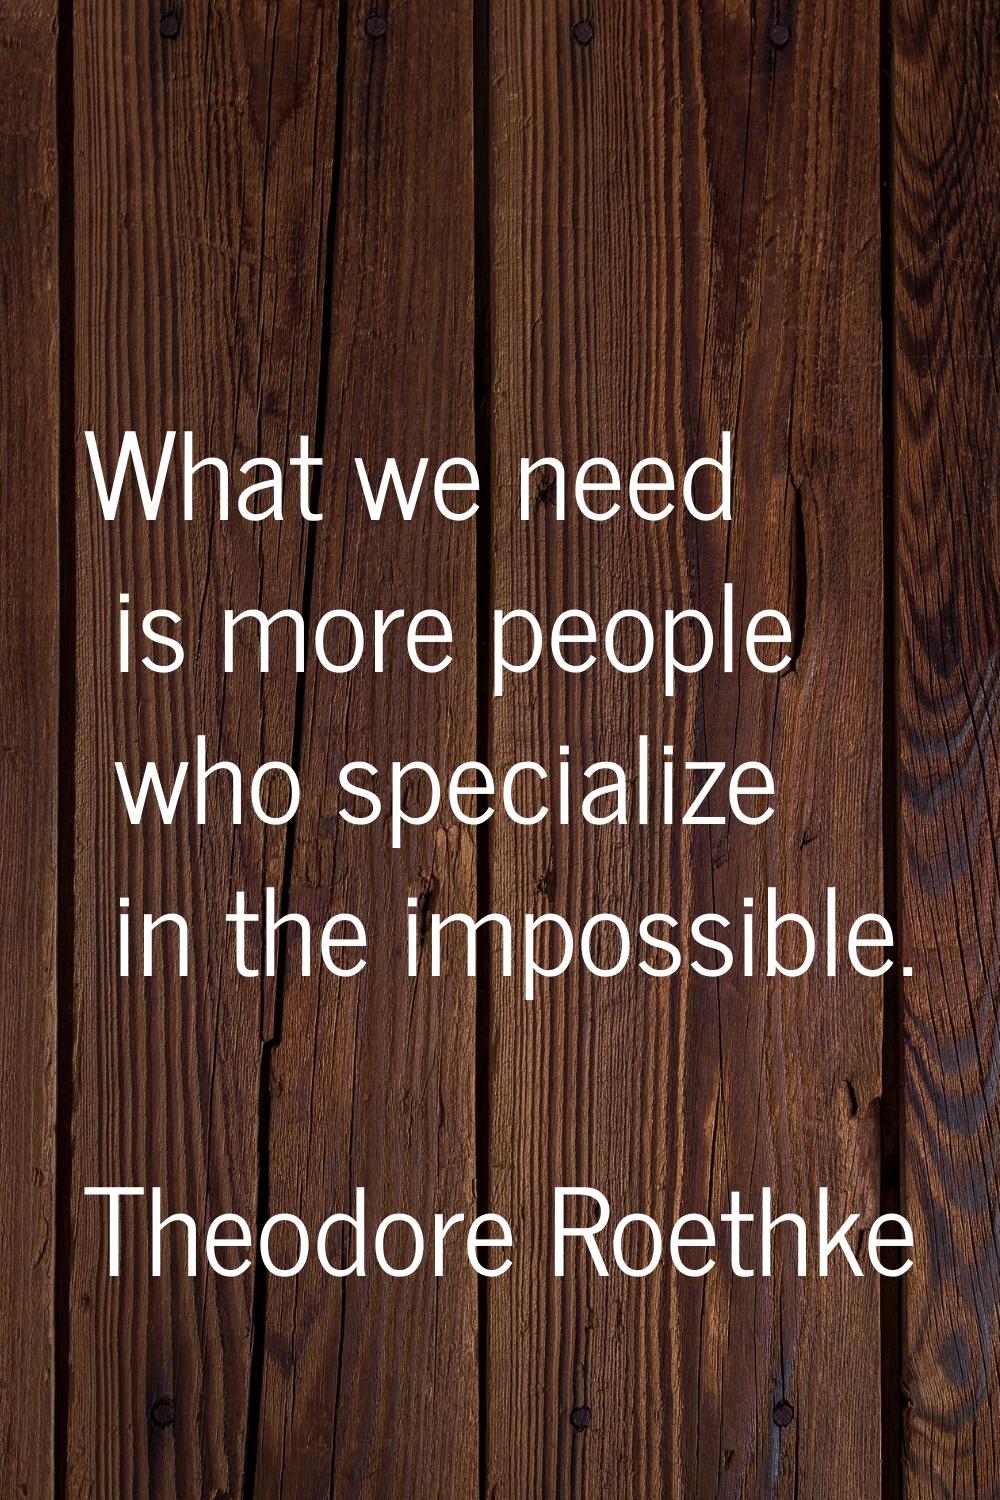 What we need is more people who specialize in the impossible.